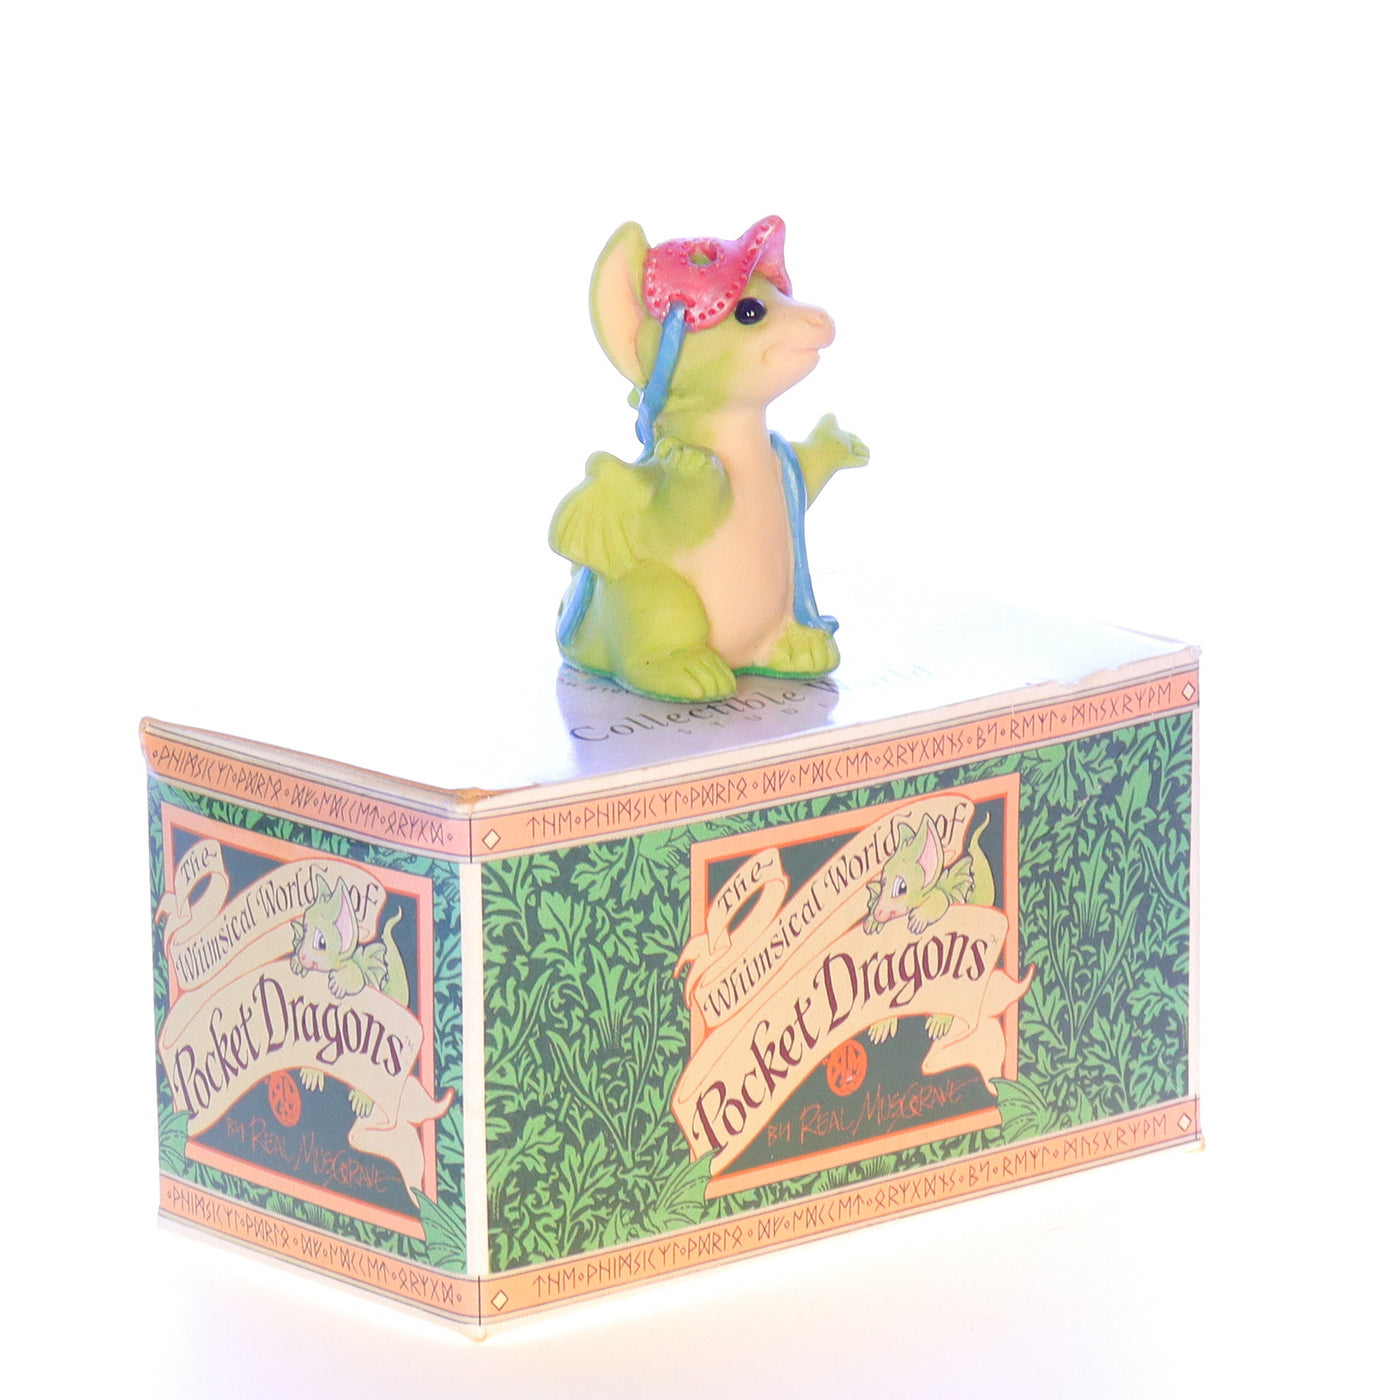 Whimsical_World_of_Pocket_Dragons_002853_Its_Me_Halloween_Figurine_1997_Box Front Right View